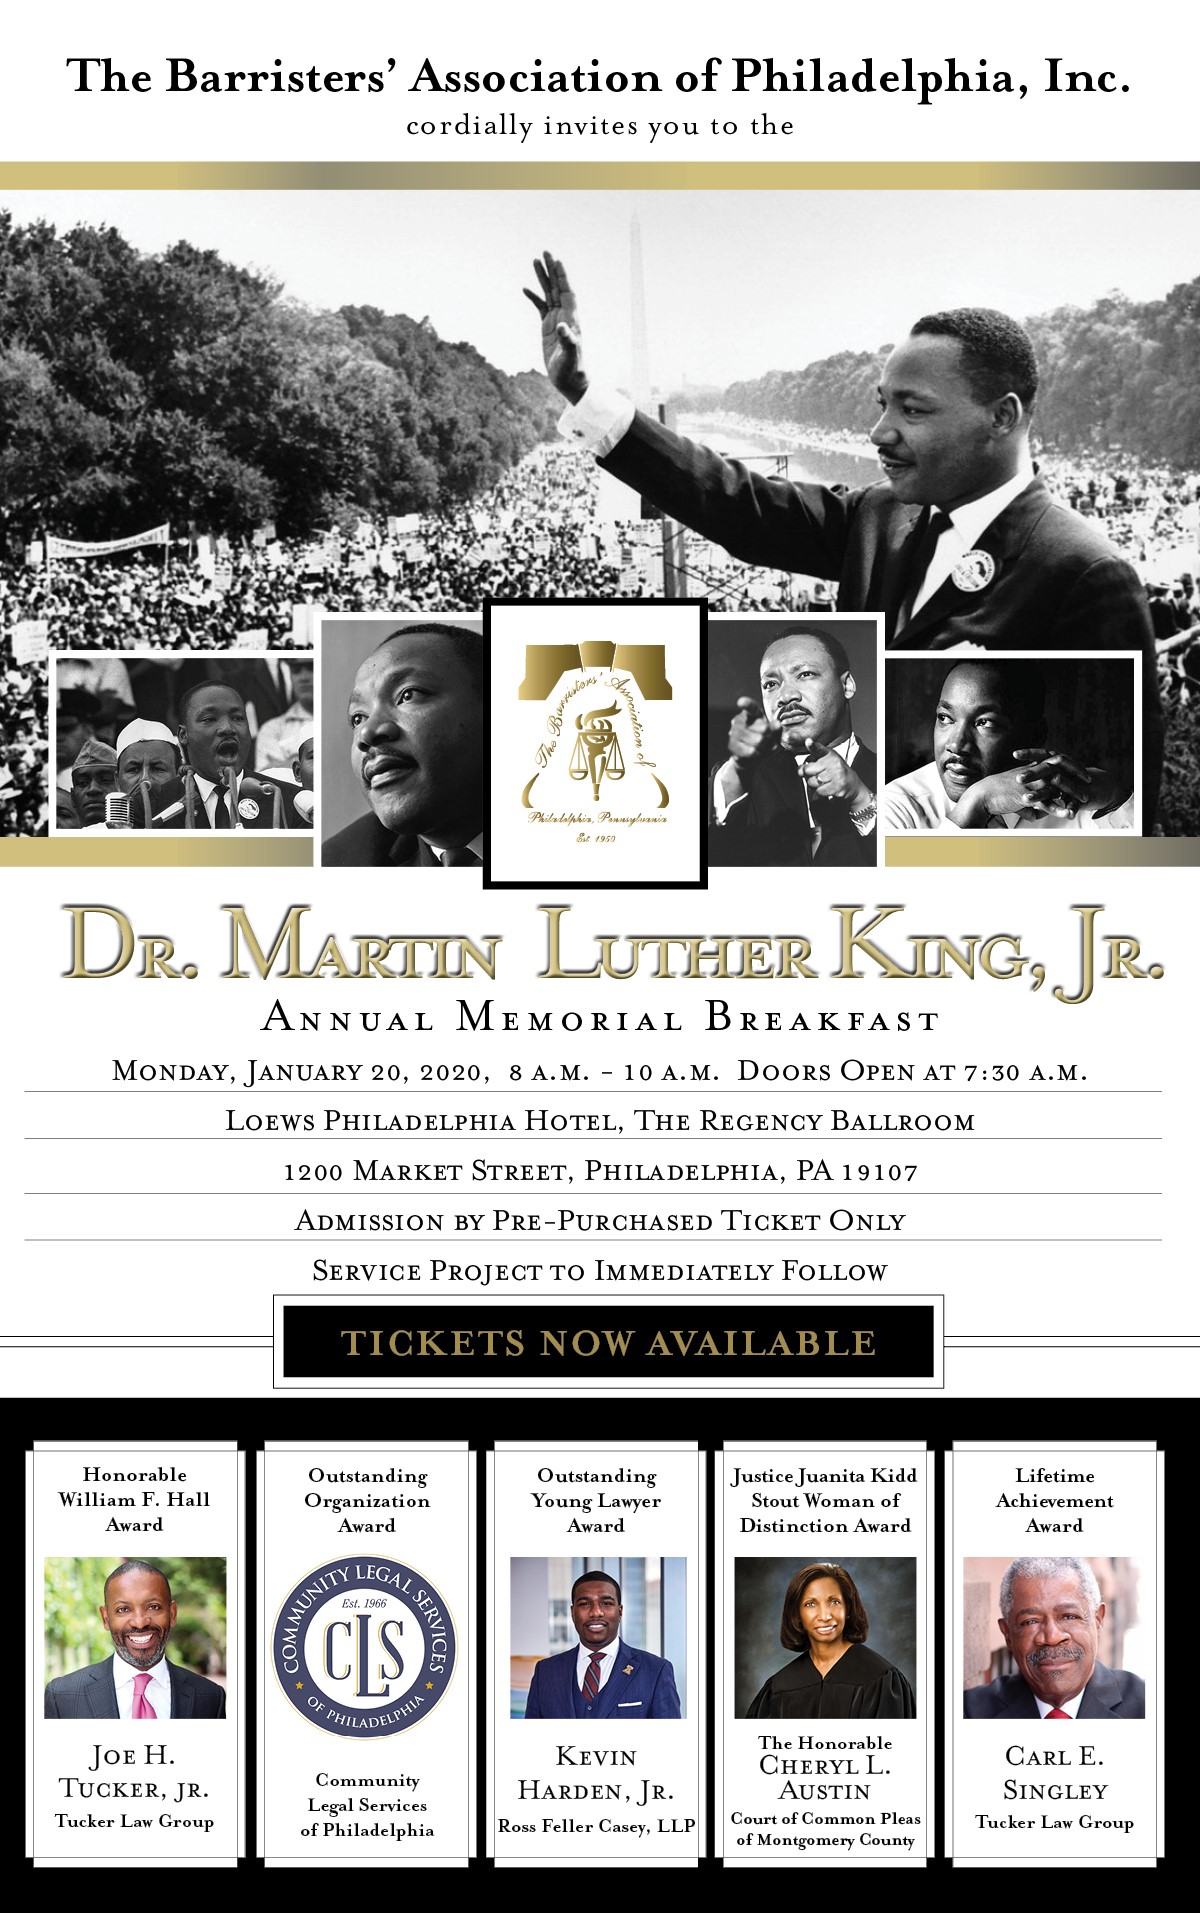 Dr. Martin Luther King, Jr. Annual Memorial Breakfast